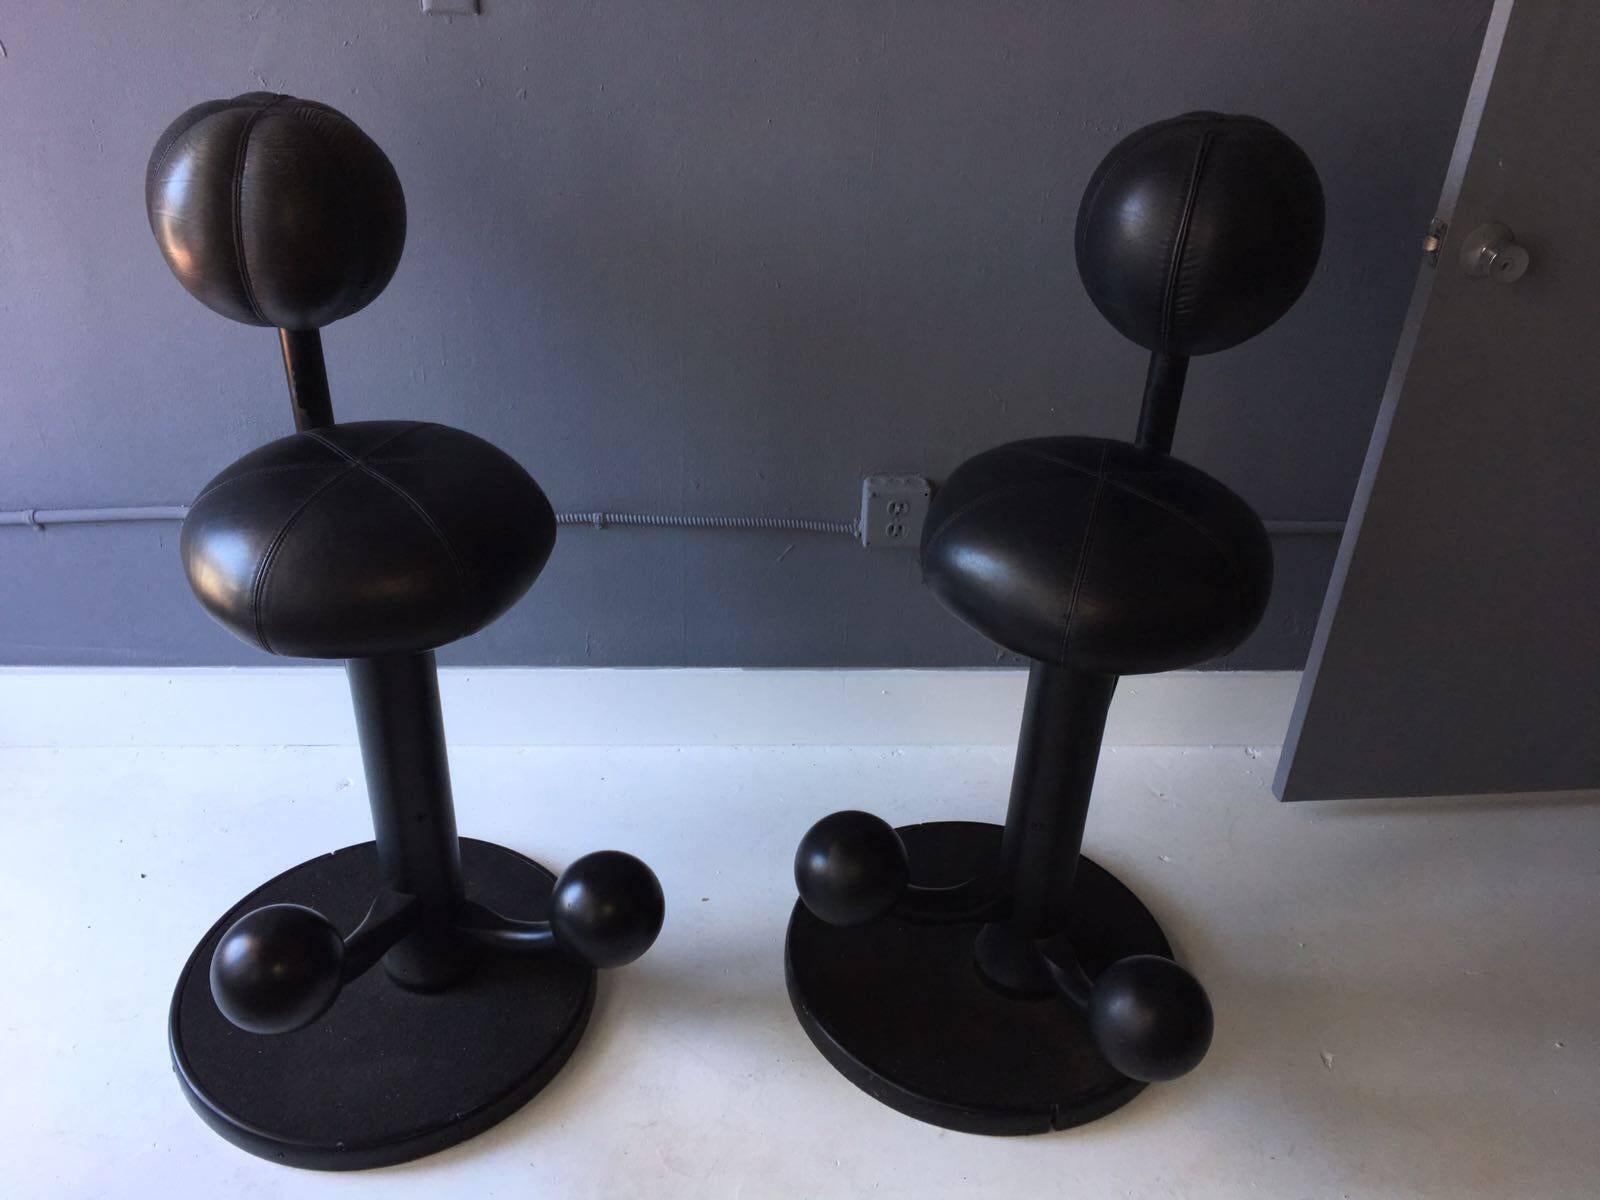 A pair of very cool bar stools from Norway designed by Peter Opsvik circa 1980s. With a Postmodern playfulness but rooted in the Scandinavian concept of "Hygge", the bar stools seem to morph from a group of balls linked by tree trunk, yet